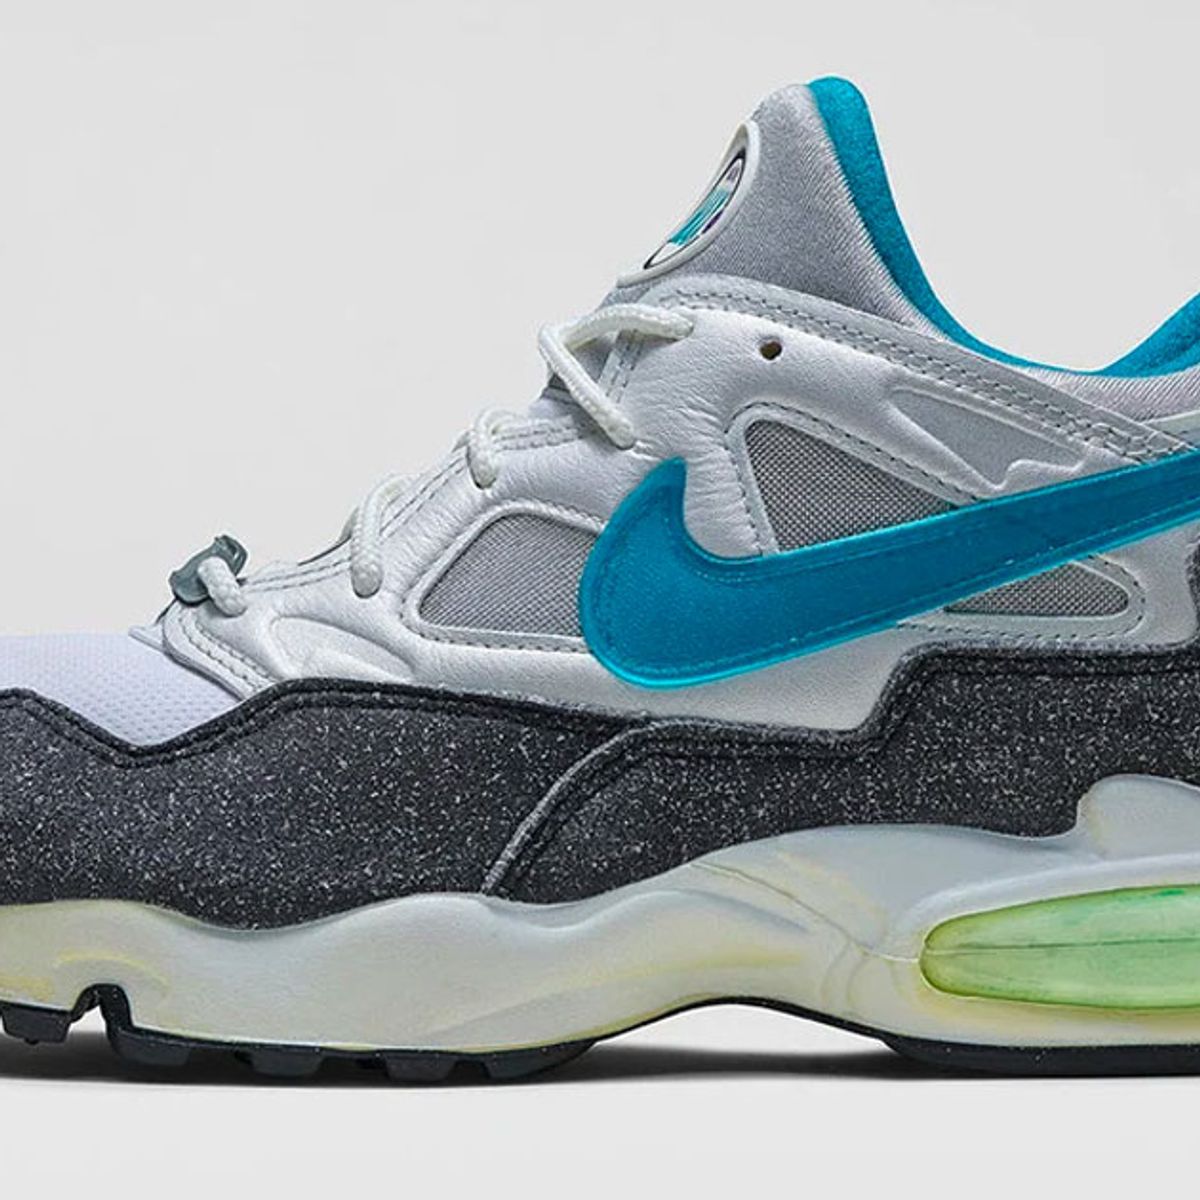 Nike Air Max Sneakers That Haven't Been Retroed - Freaker